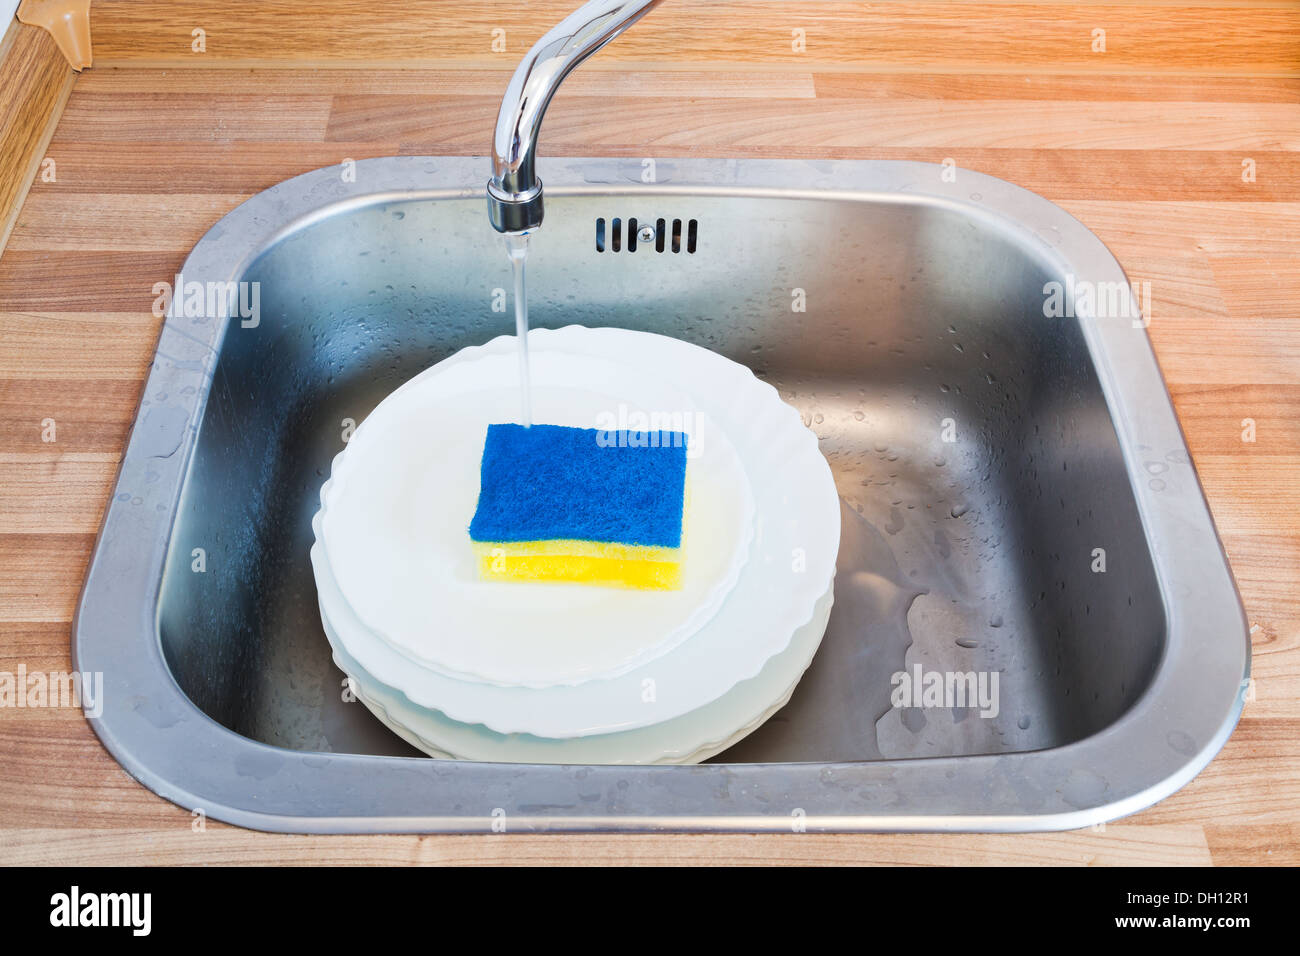 wash-up by cleaning sponge in metal washbasin in kitchen Stock Photo